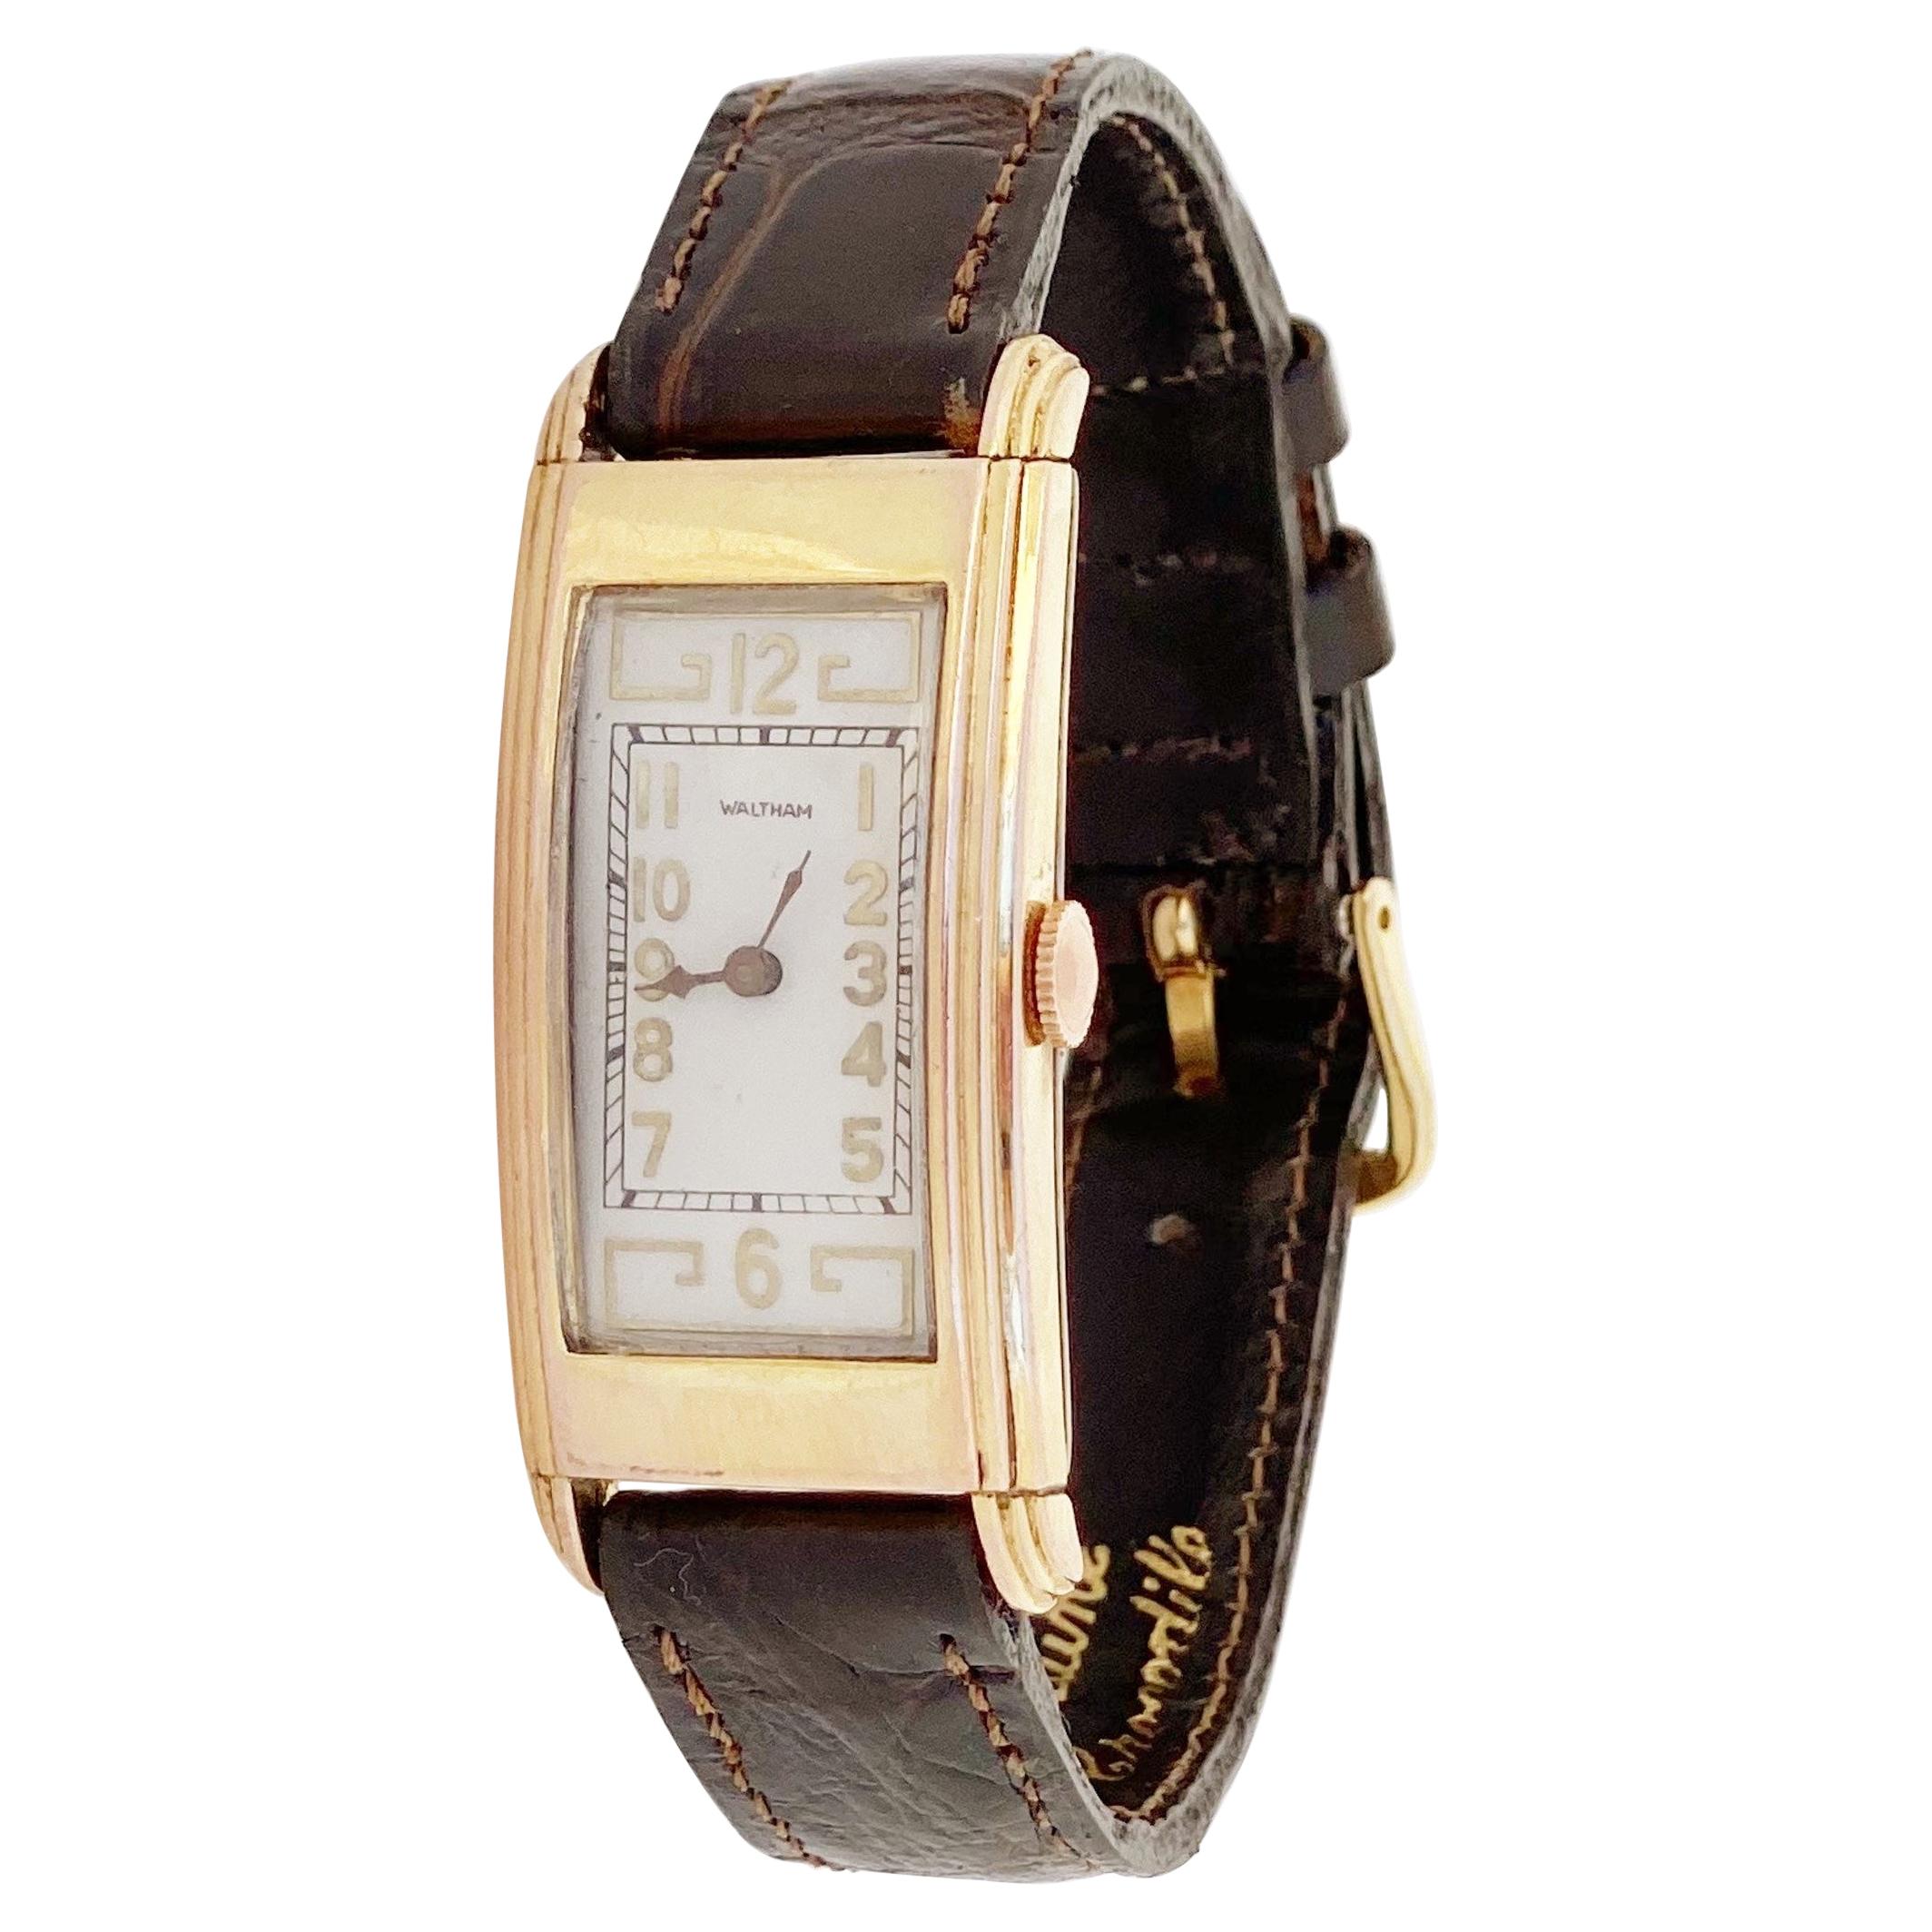 Gold Plated Rectangular Art Deco Style Watch w Crocodile Strap by Waltham, 1940s For Sale